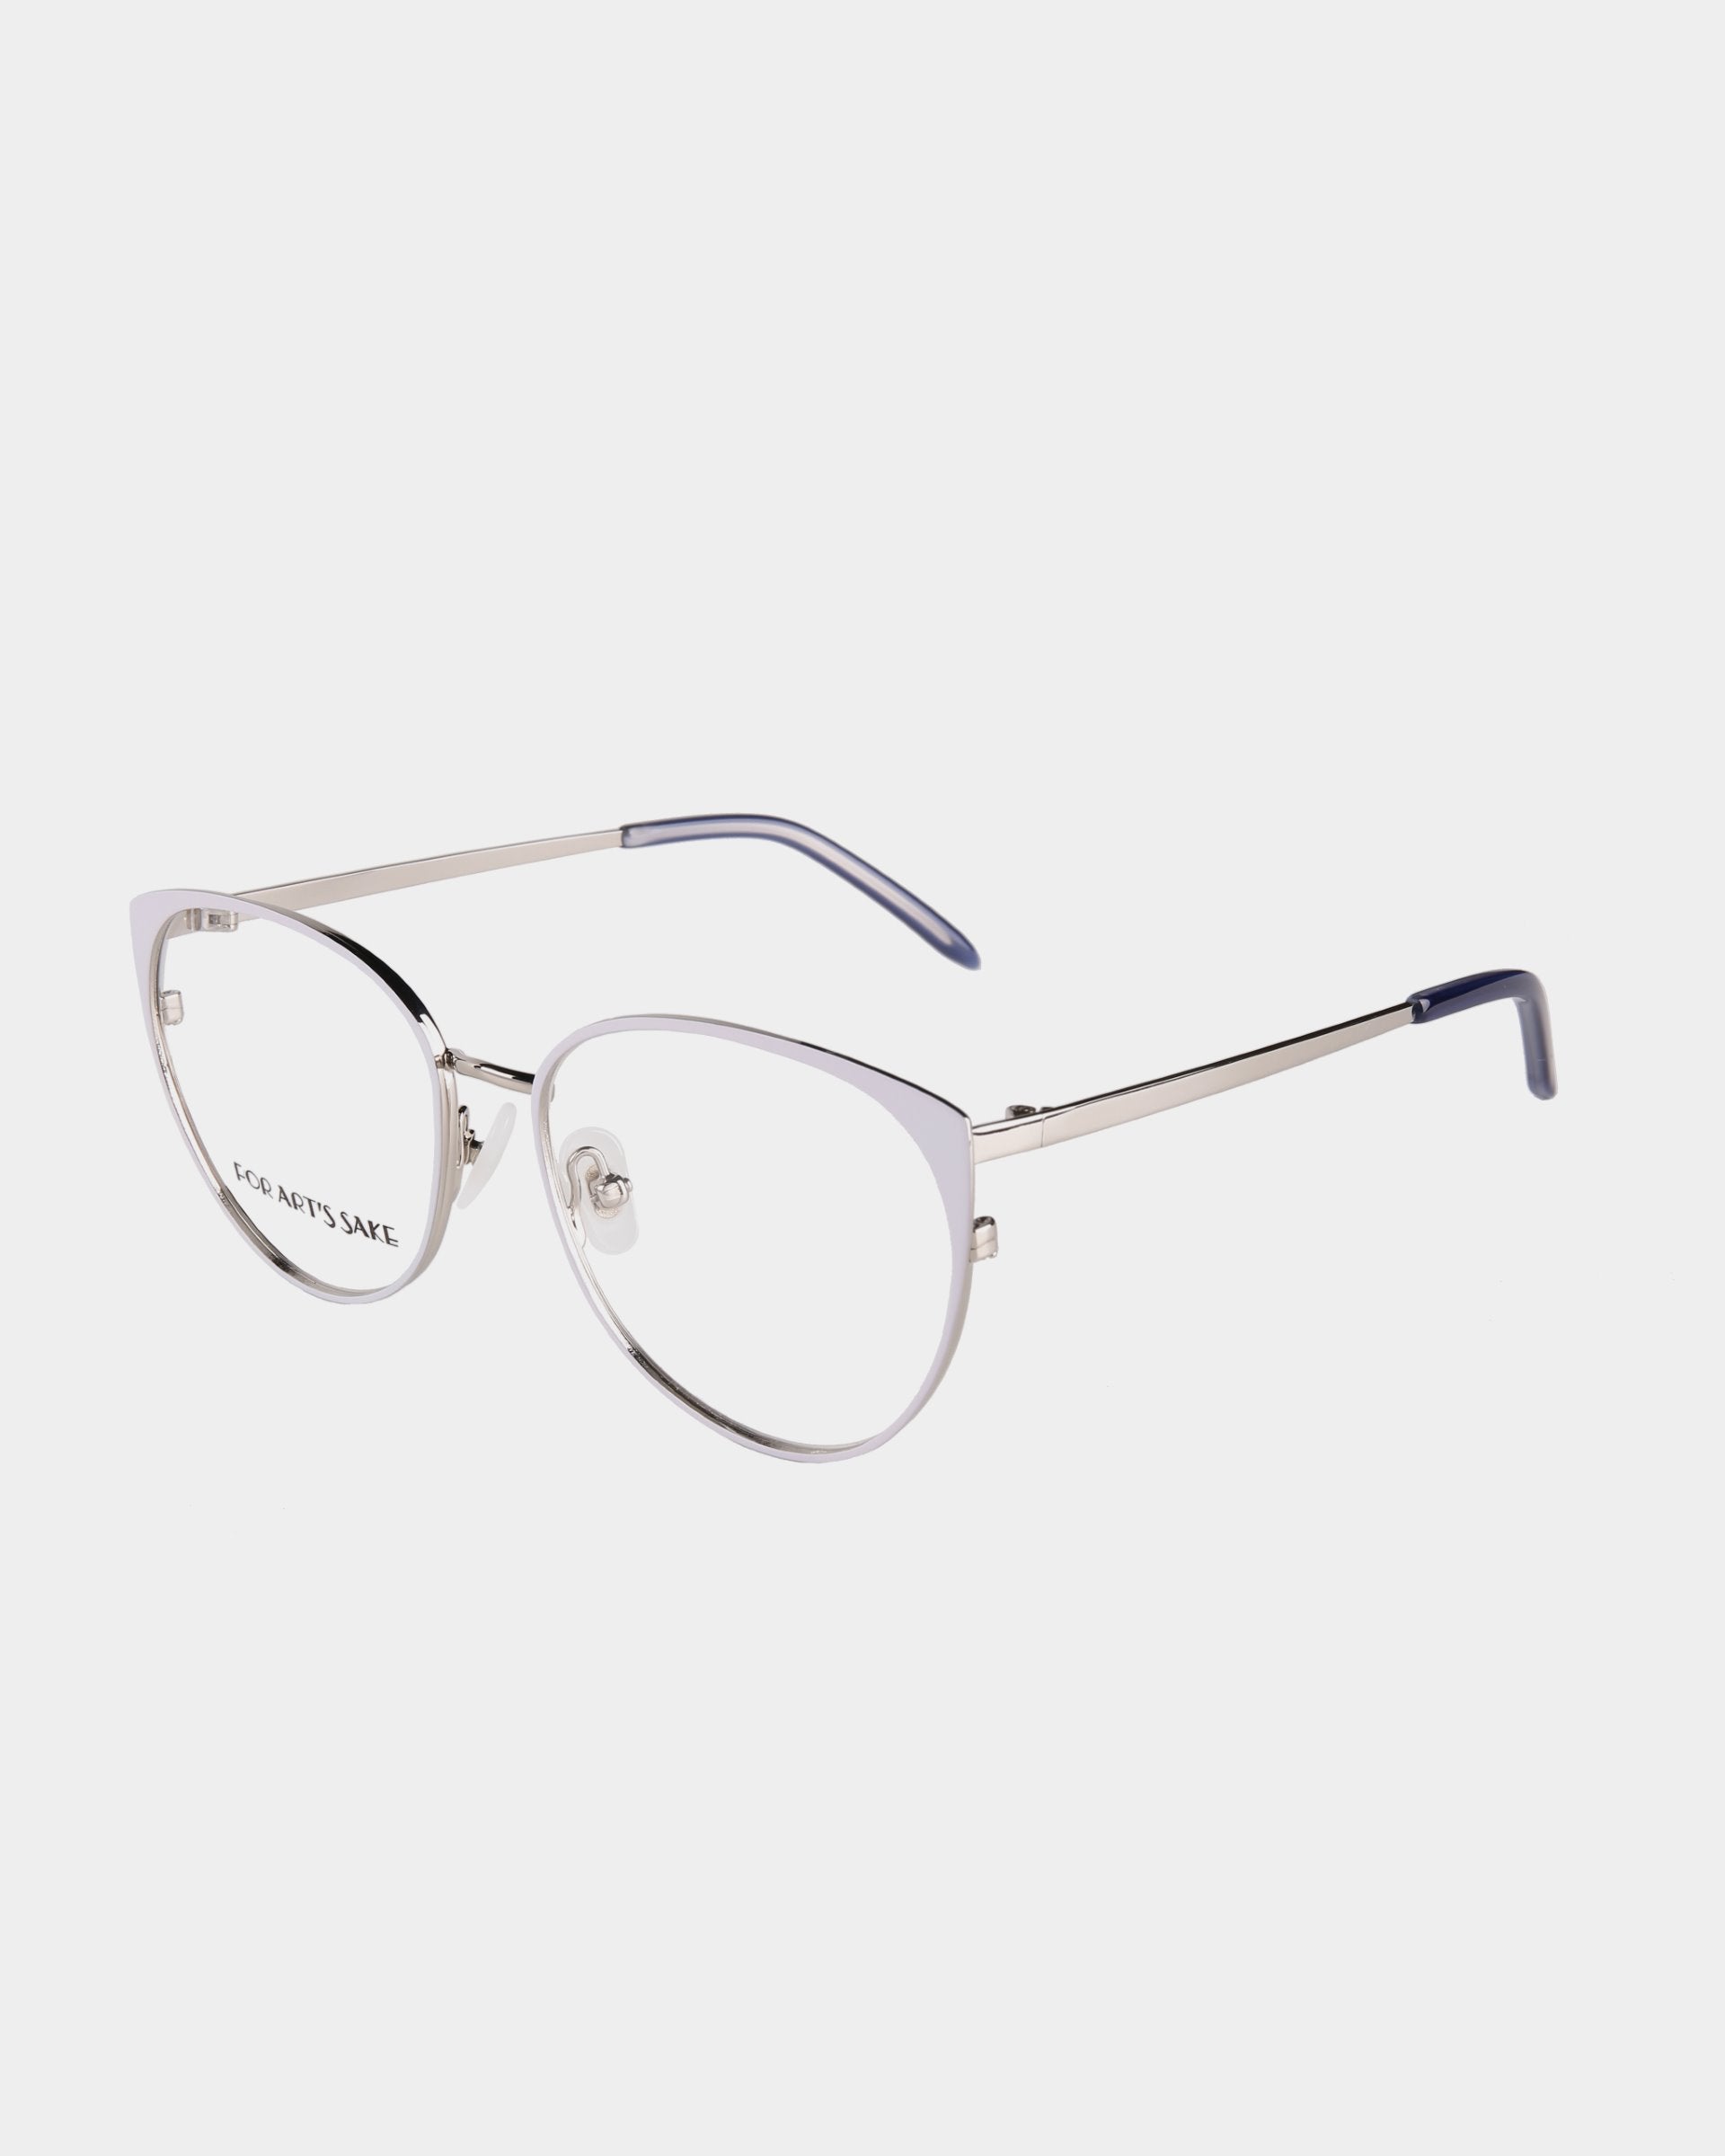 A pair of elegant, metallic-framed eyeglasses with a thin, cat-eye design and luxurious 18-karat gold plating. The temples are equipped with dark blue tips, and the nose pads are transparent. The right lens has subtle text inscribed on it. The background is white.

Product Name: Kaia
Brand Name: For Art&#39;s Sake®